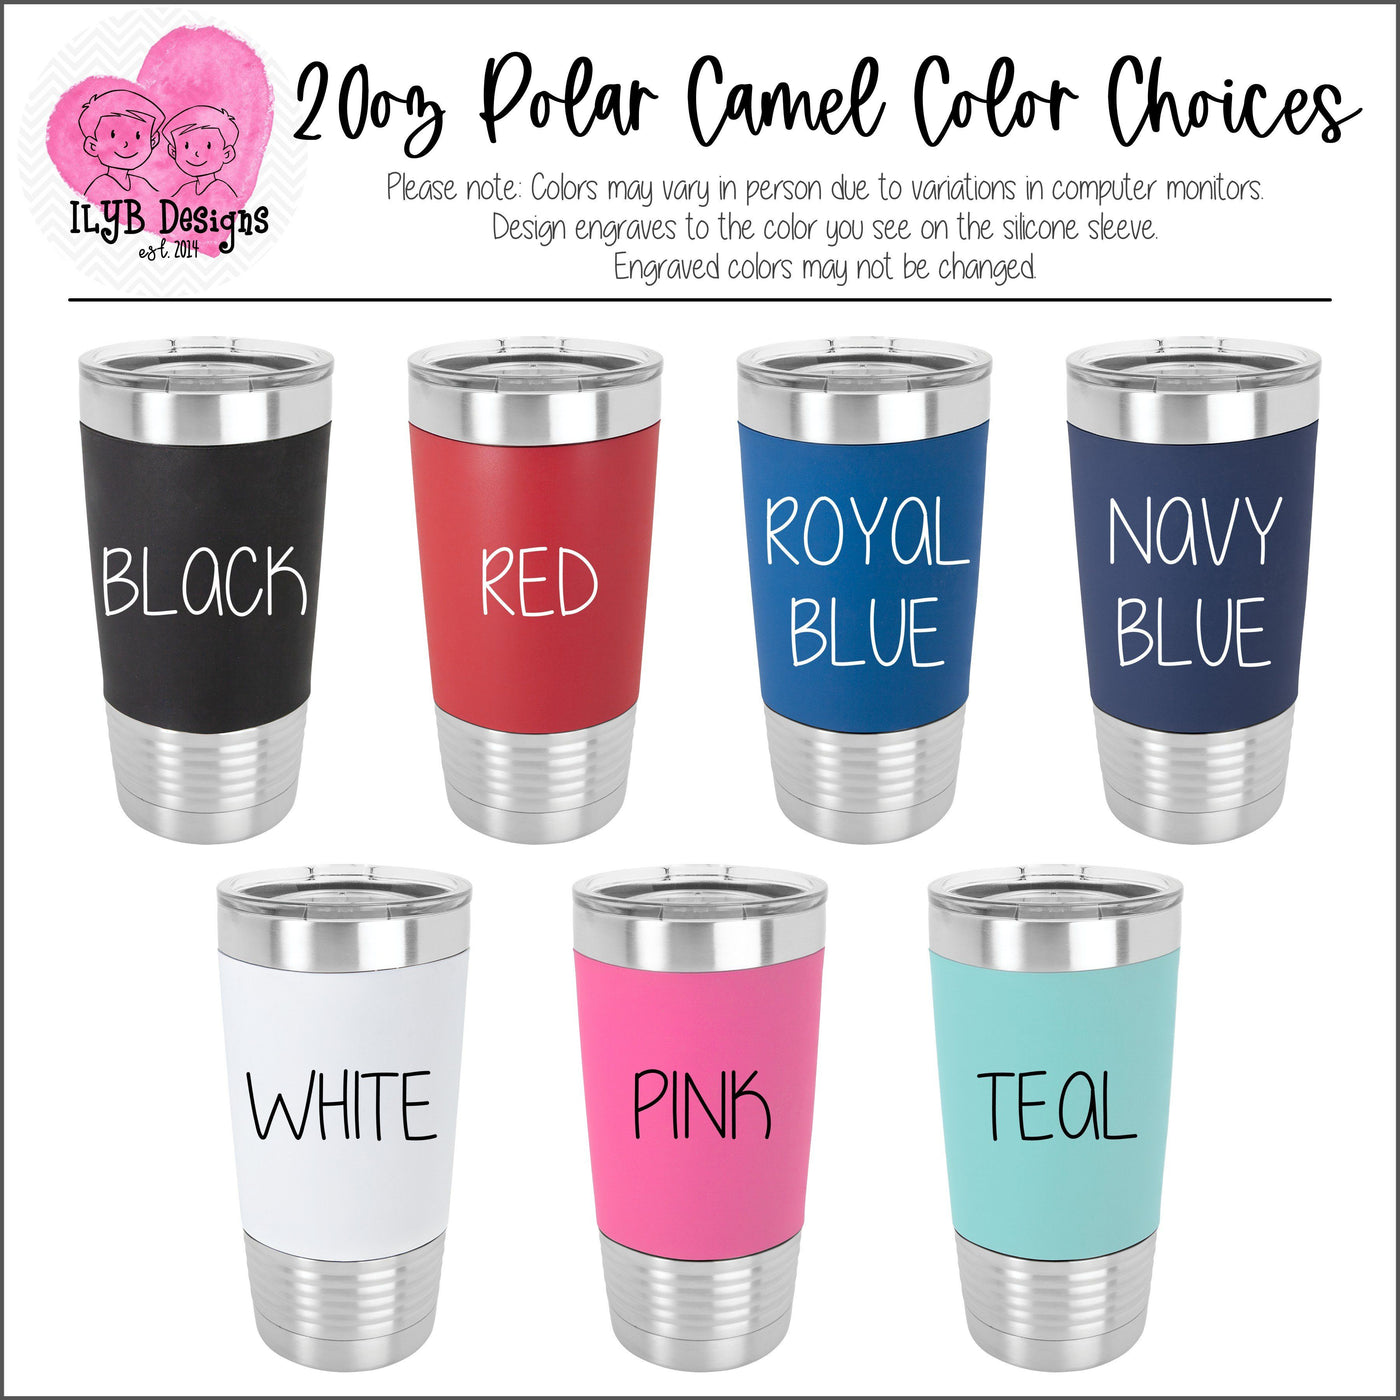 20oz Polar Camel Stainless Steel Tumbler with silicone sleeve color choices. Colors include black, red, royal blue, navy blue, white, pink, and teal.